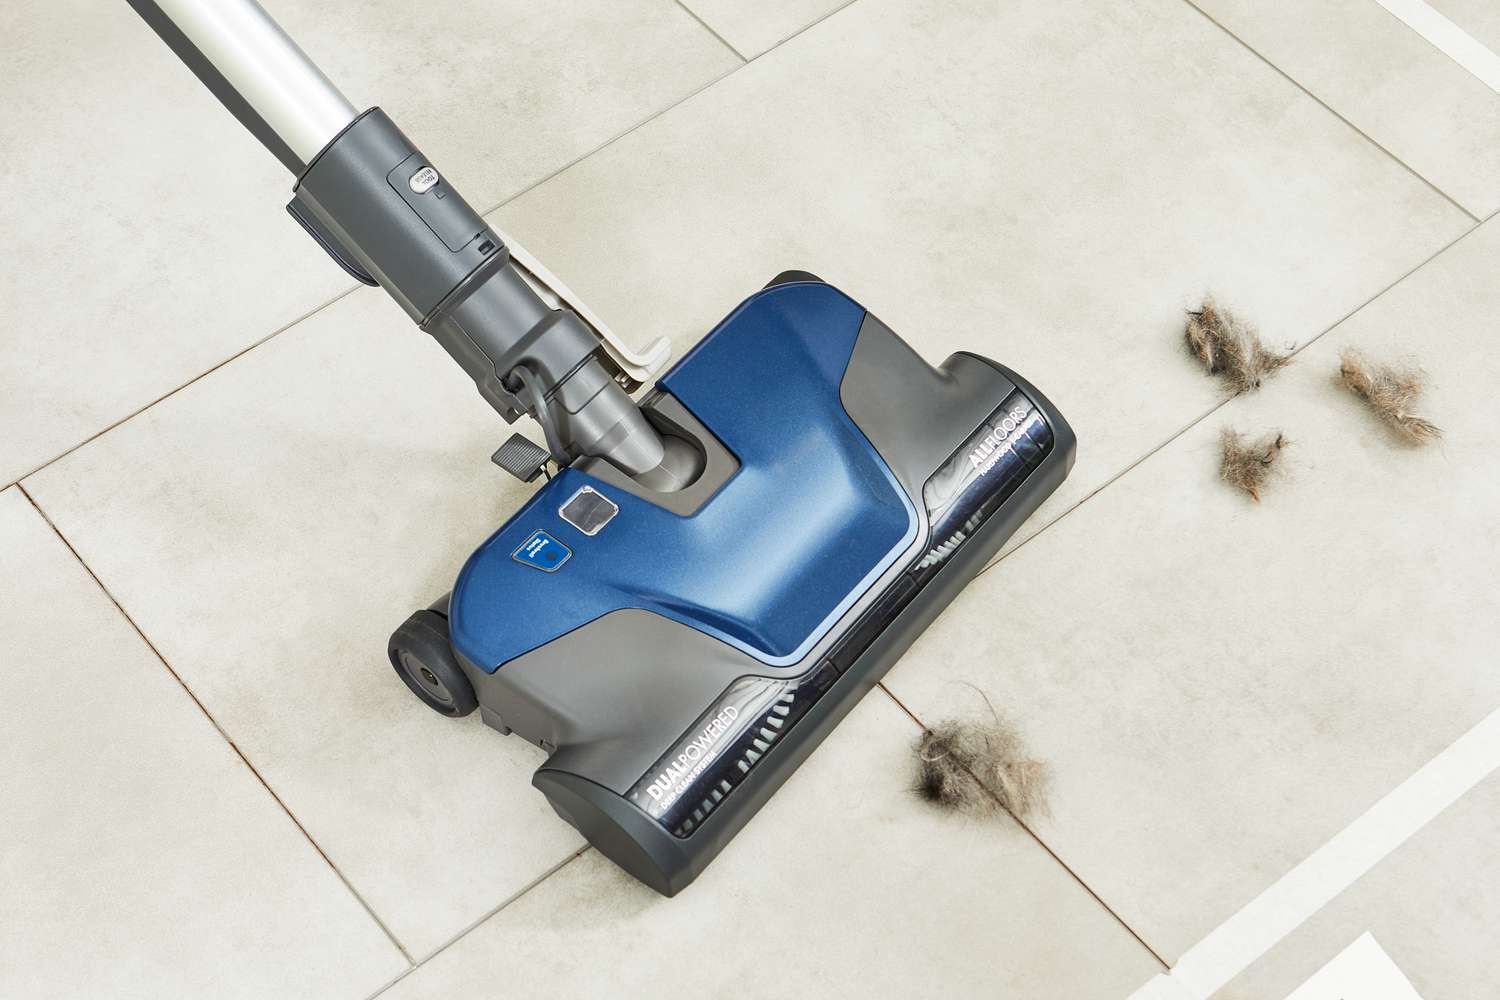 Kenmore Pet Friendly Pop-N-Go Bagged Canister Vacuum being used to clean up pet fur from white tile flooring